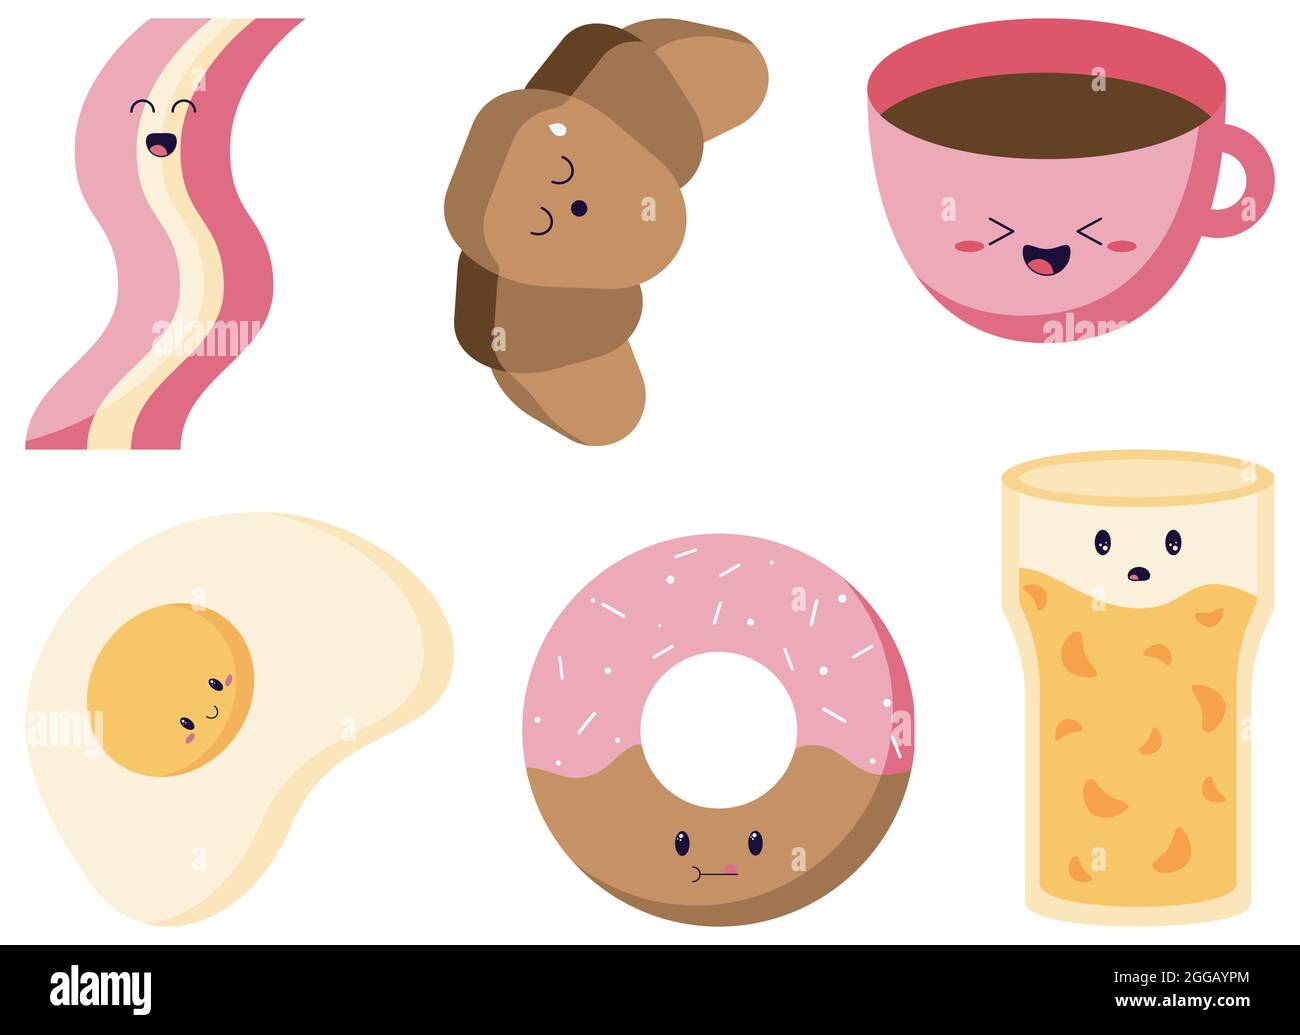 set of delicious food for breakfast in kawaii and hand drawn style. Eggs, coffee, juice, donut, croissant and bacon cartoon characters. Stock Vector